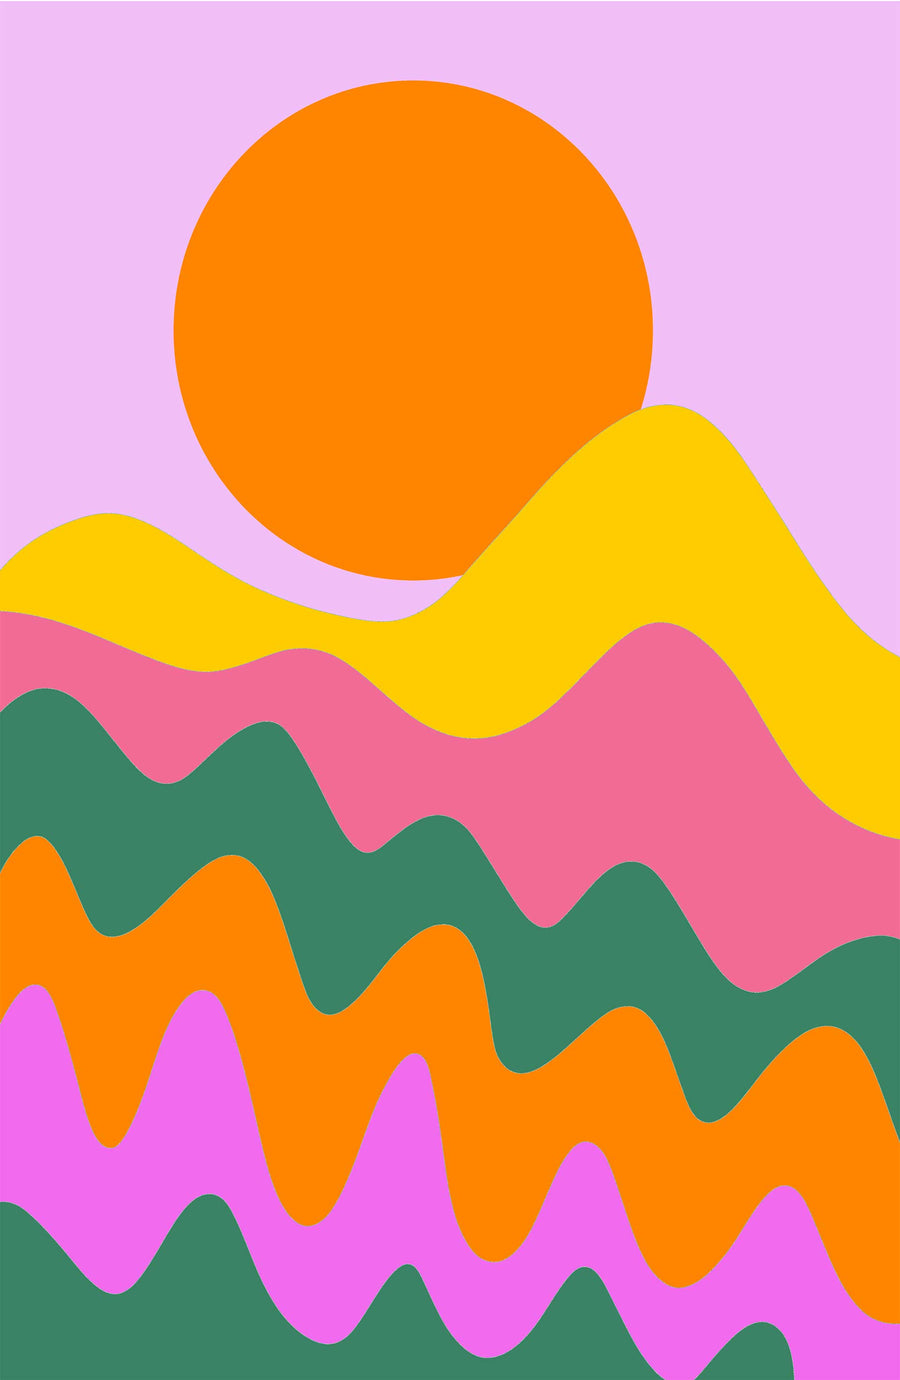 Colourful digital painting in bold, block colours of pink, orange, yellow, purple and green to form what looks like a sun in the sky with colourful waves or mountains.